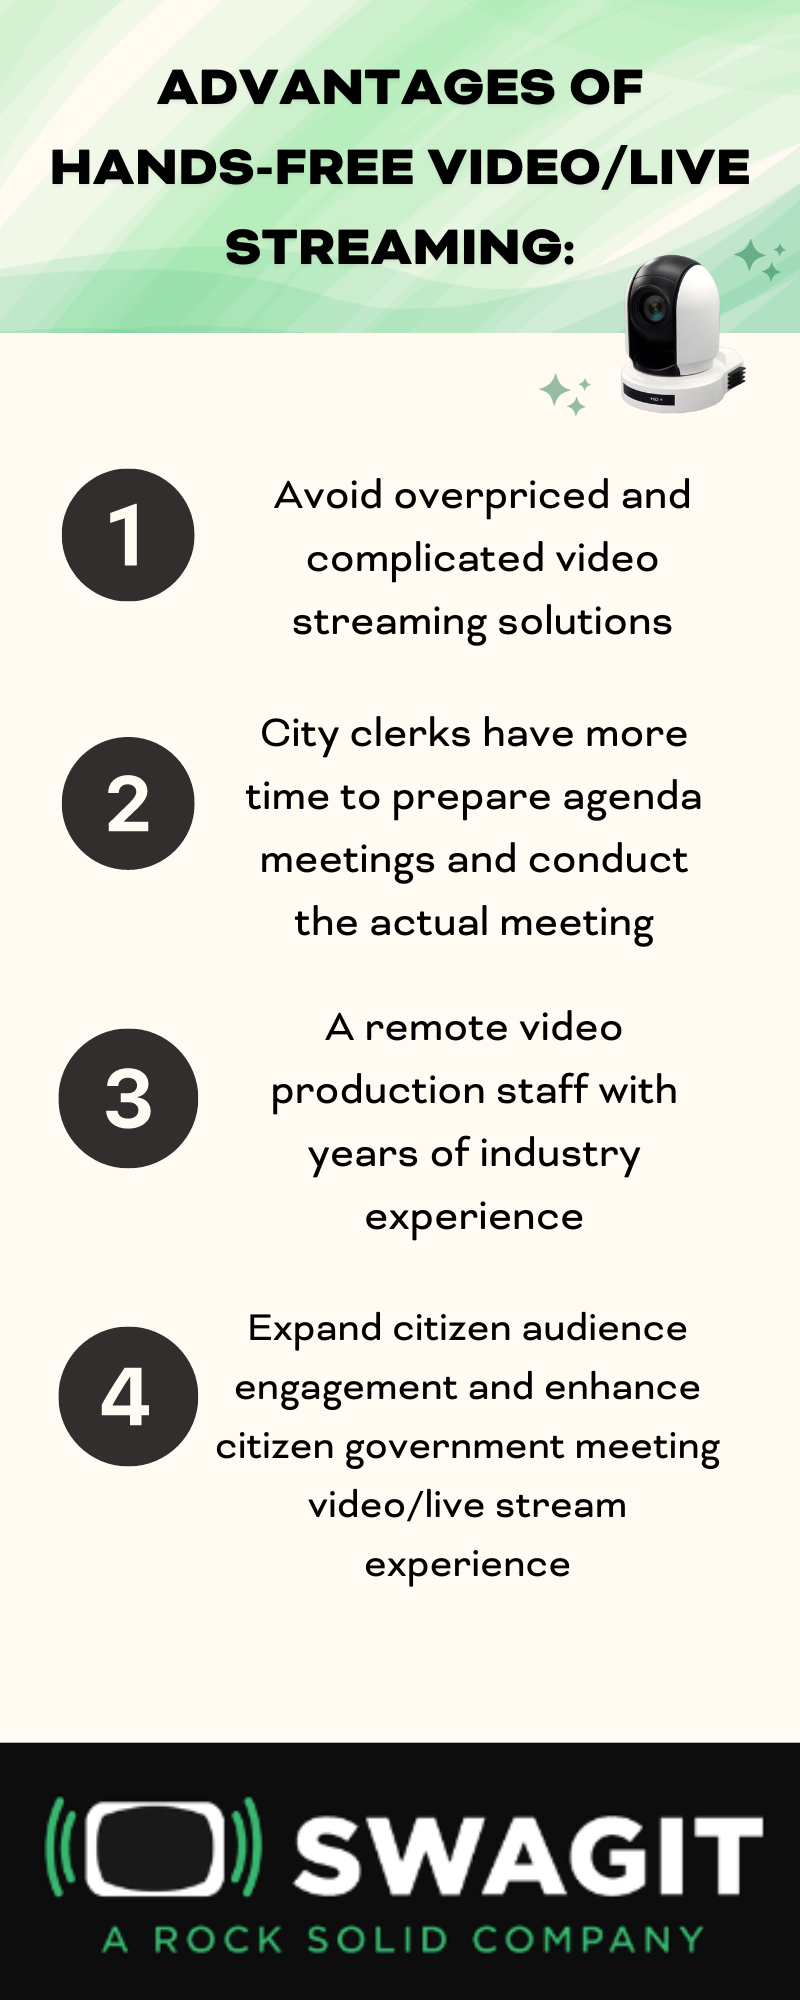 ADVANTAGES OF HANDS-FREE VIDEOLIVE STREAMING